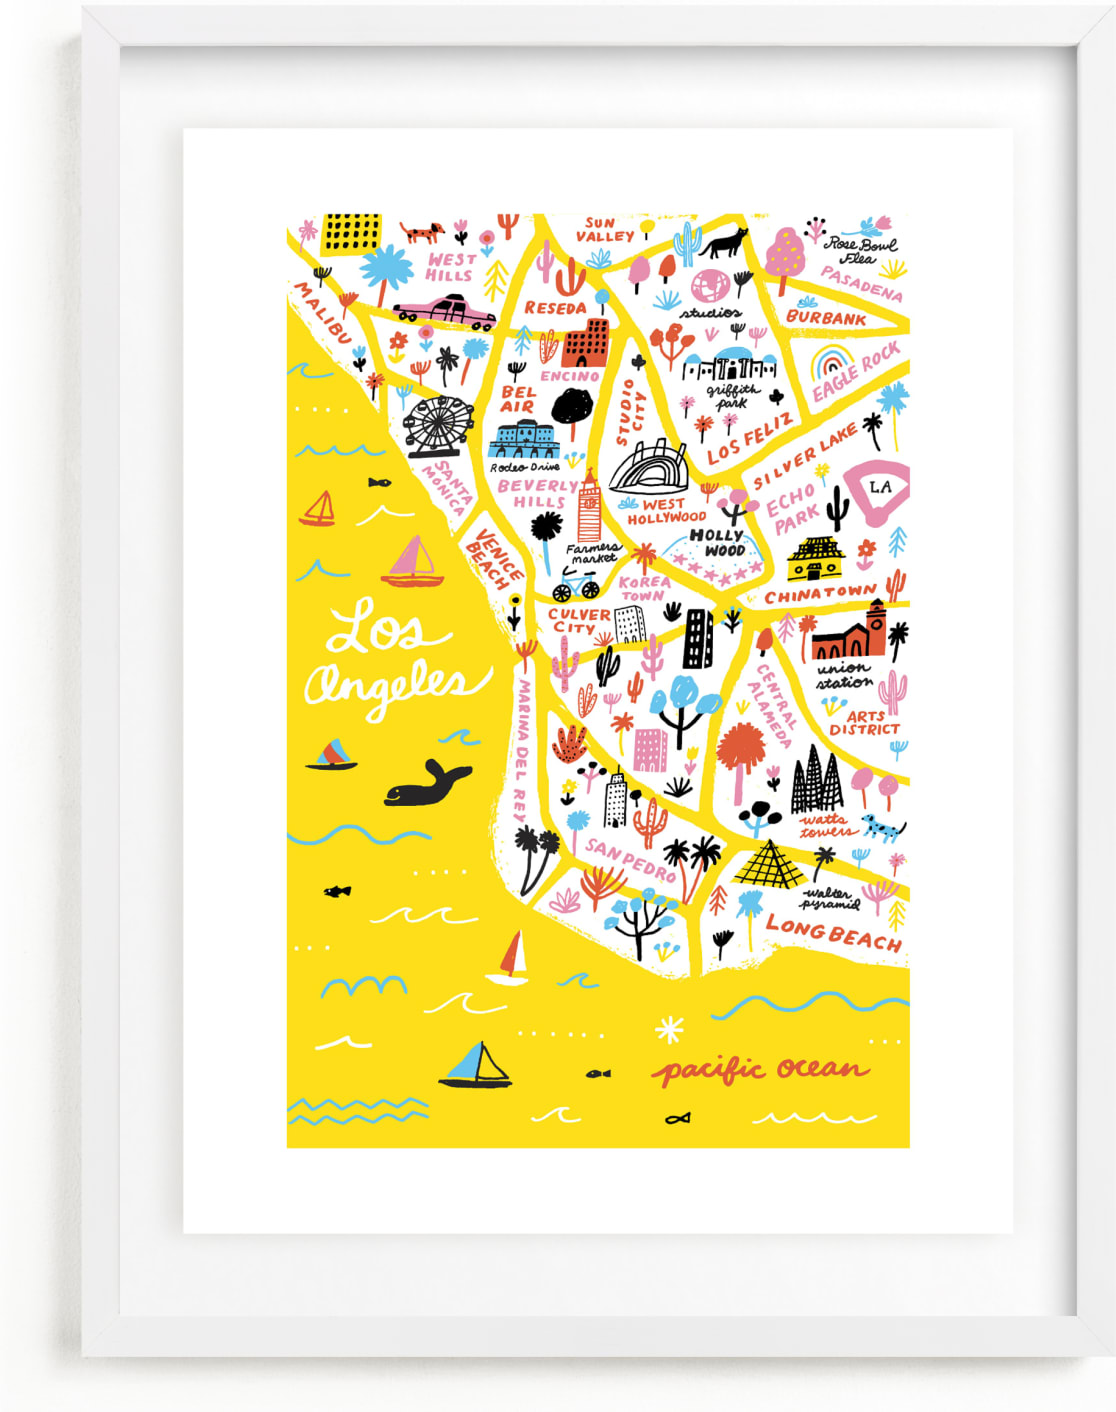 This is a colorful art by Jordan Sondler called I Love Los Angeles.